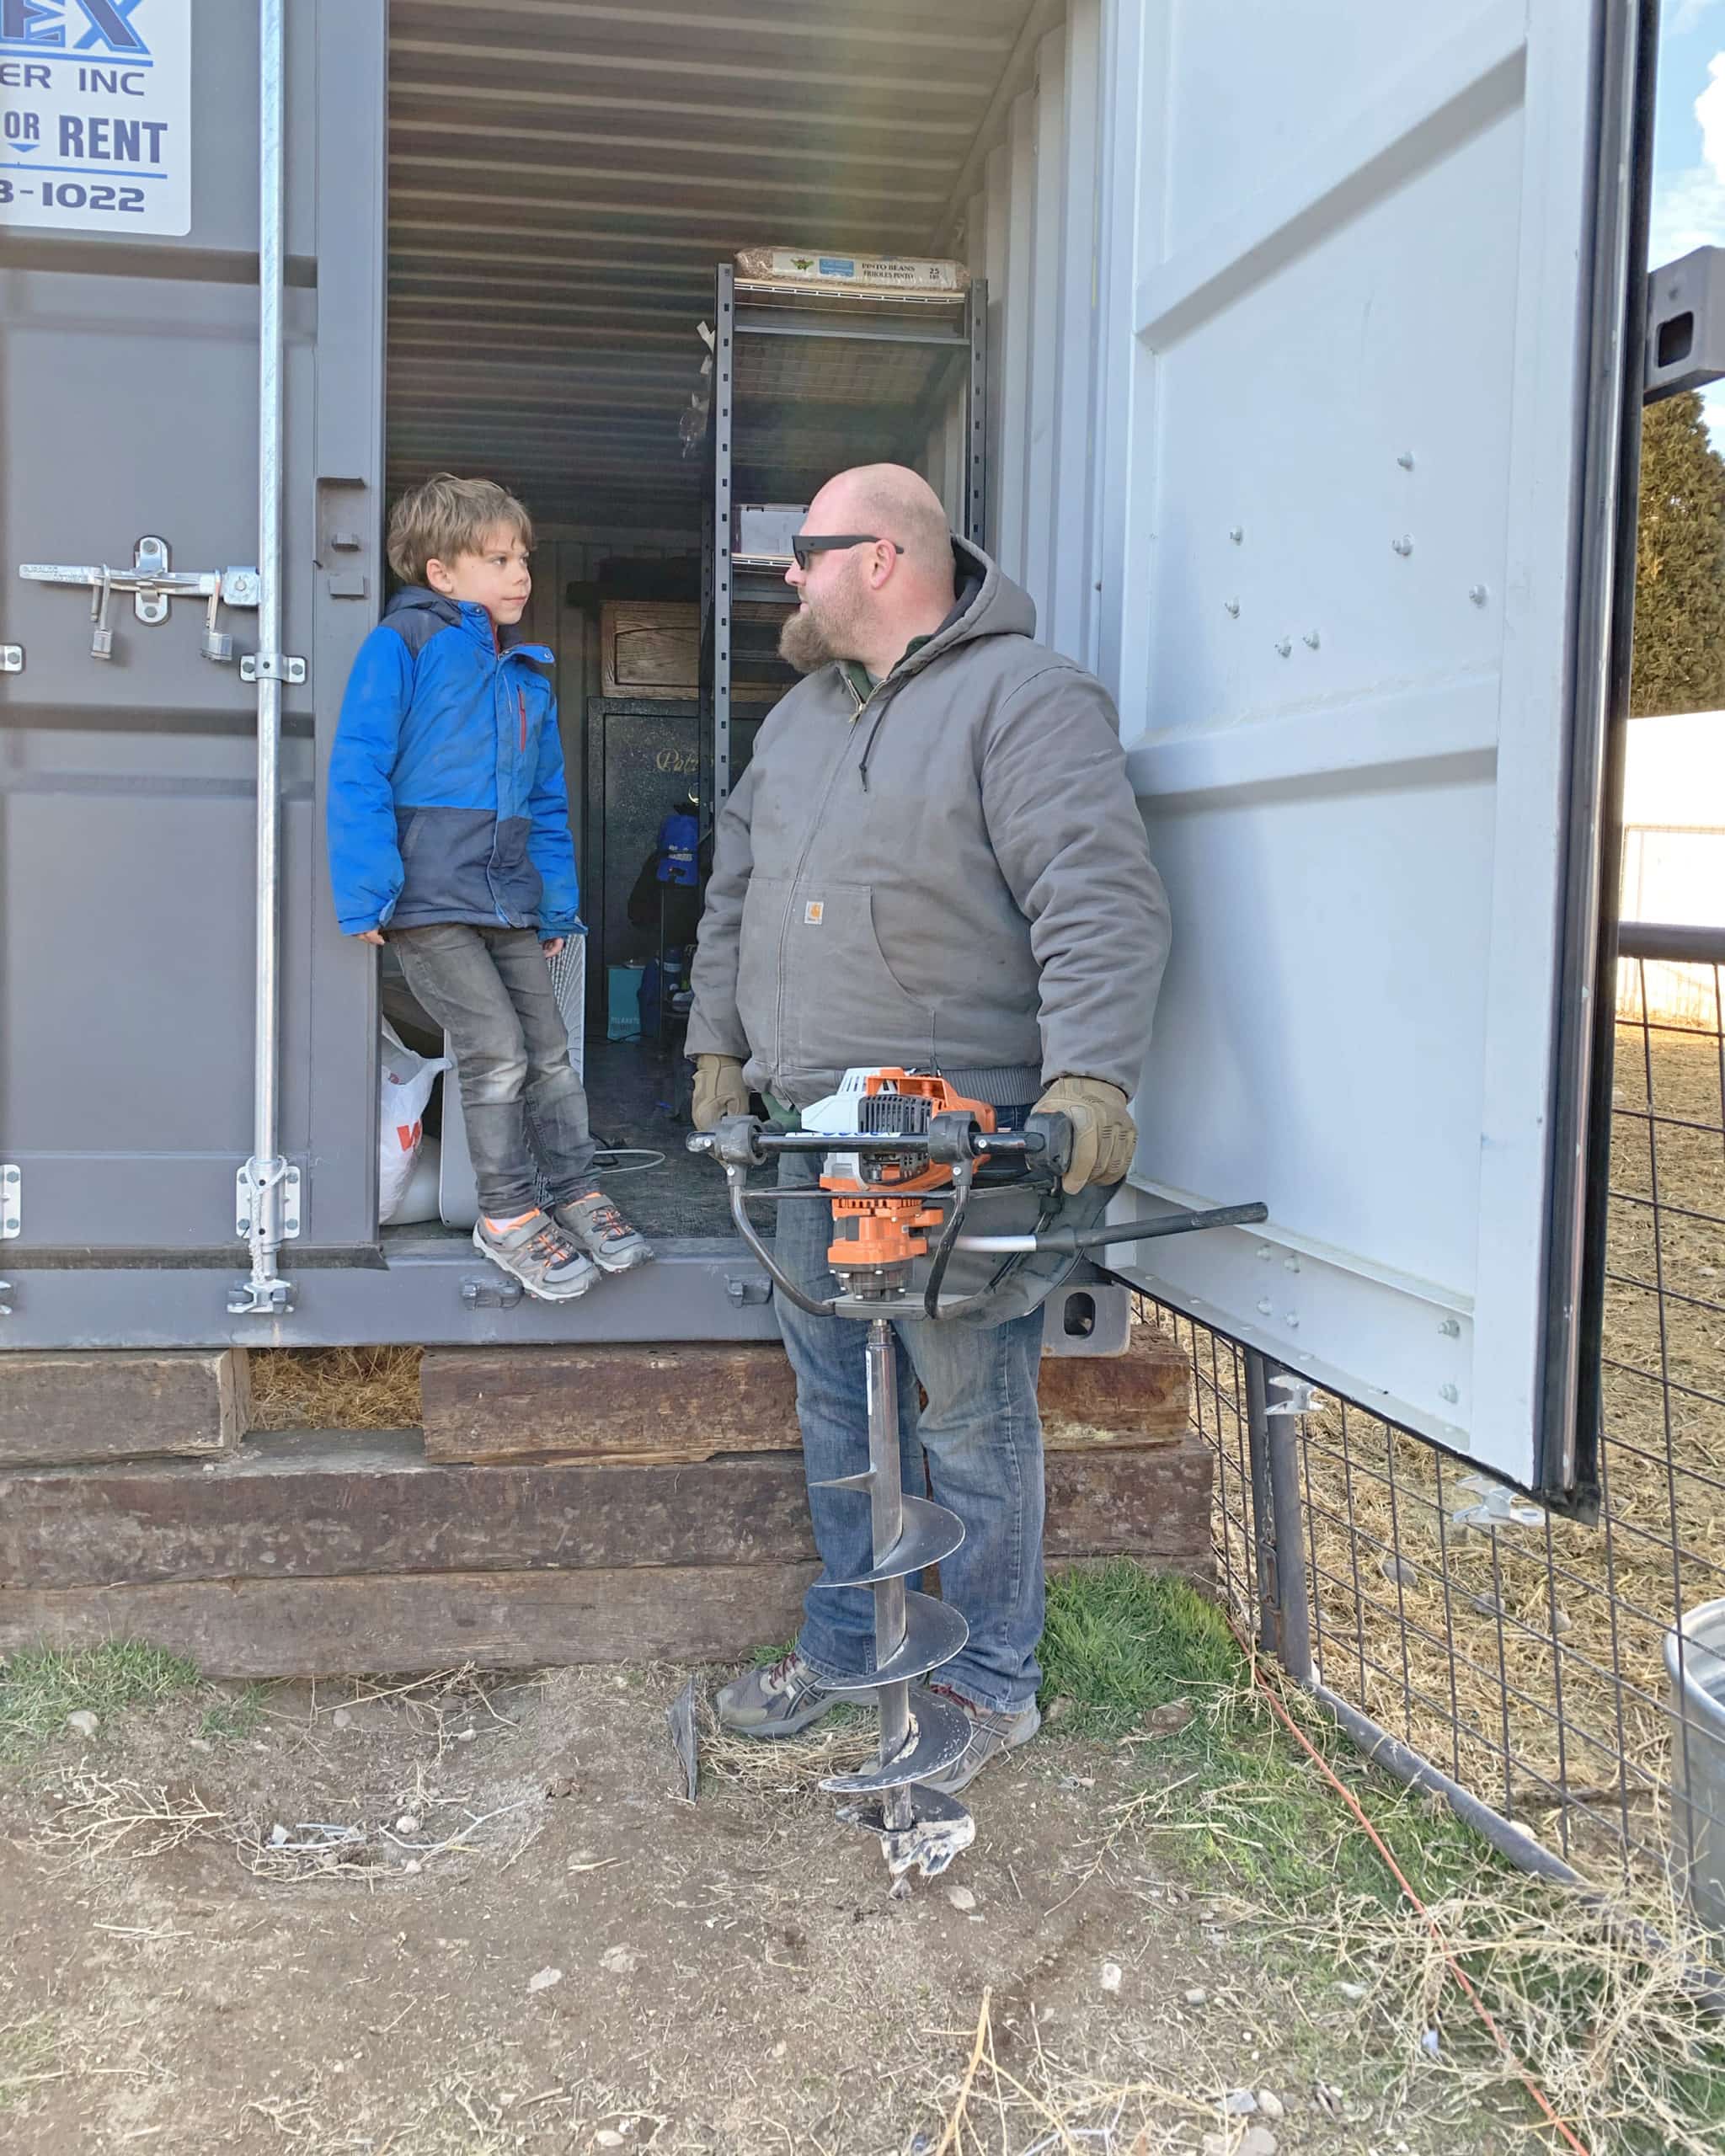 Elcih day and nate day with stihl auger in shipping container